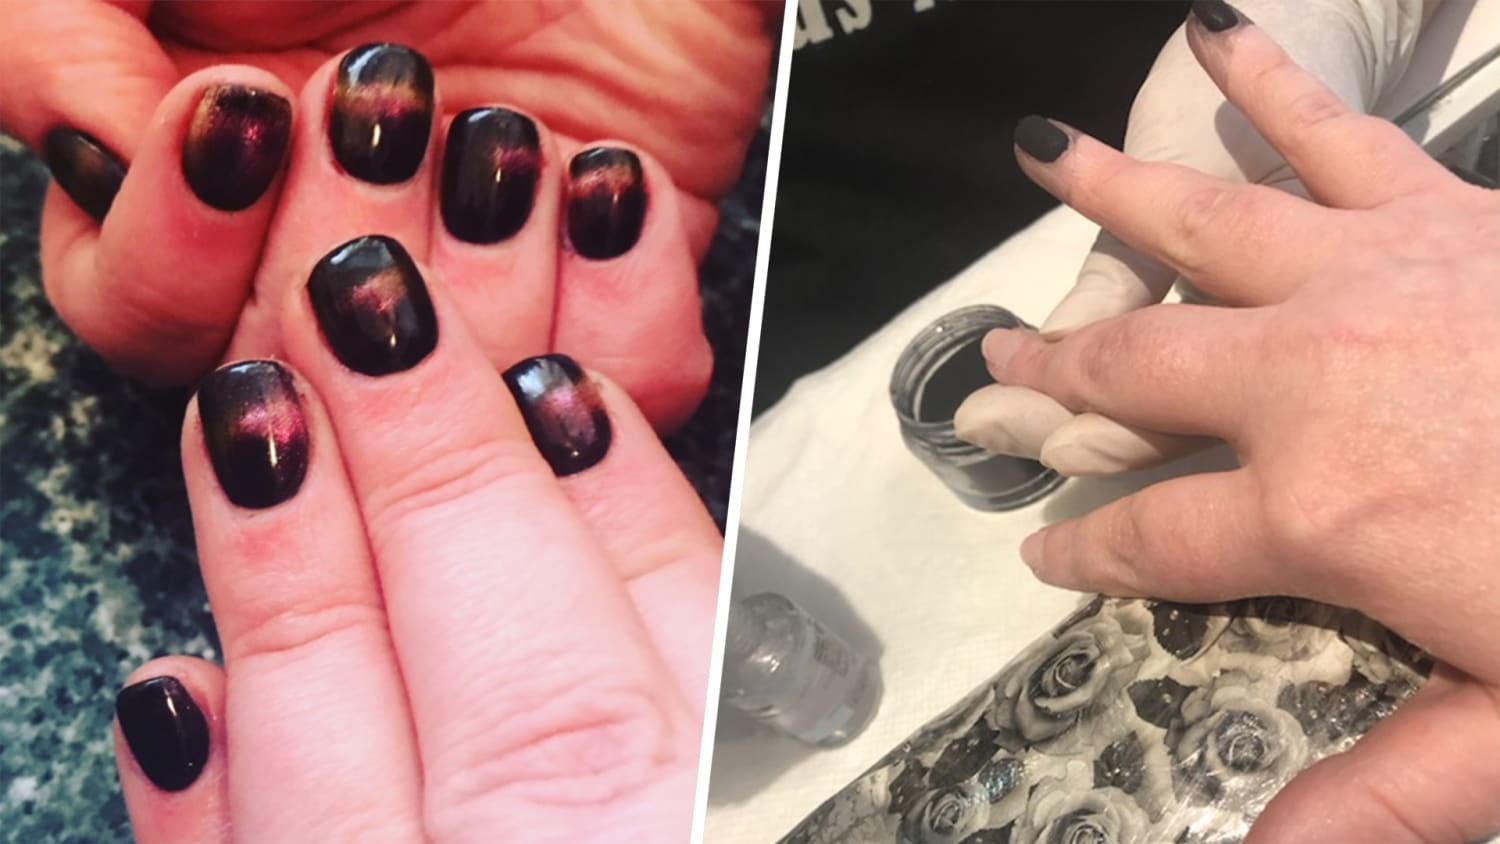 is gel nail polish bad for your nails